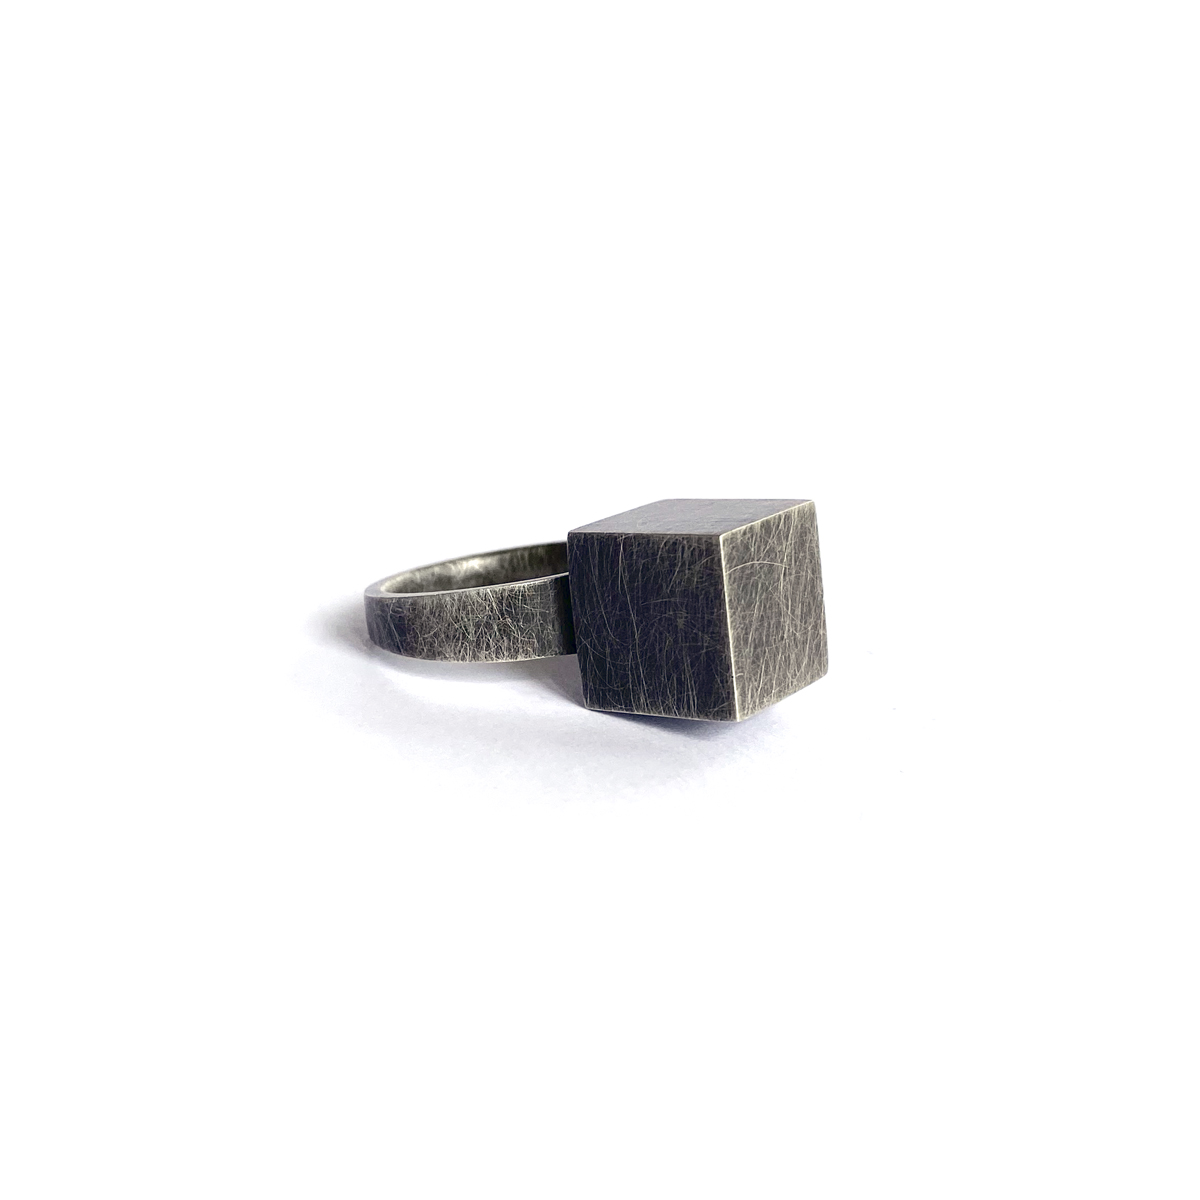 Four Corners Ring (large), sterling silver, 2020, Kate Alterio